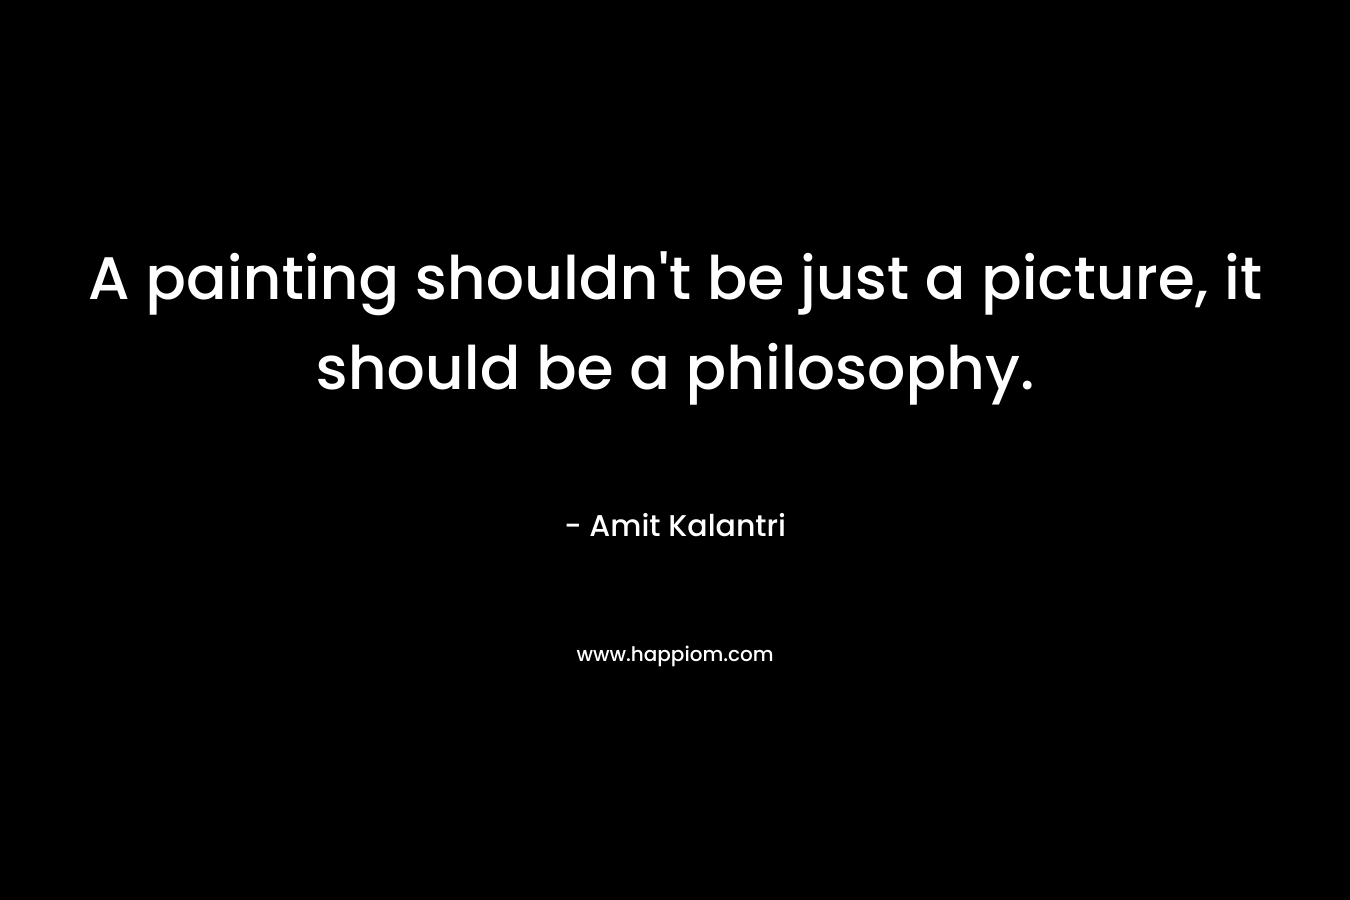 A painting shouldn't be just a picture, it should be a philosophy.